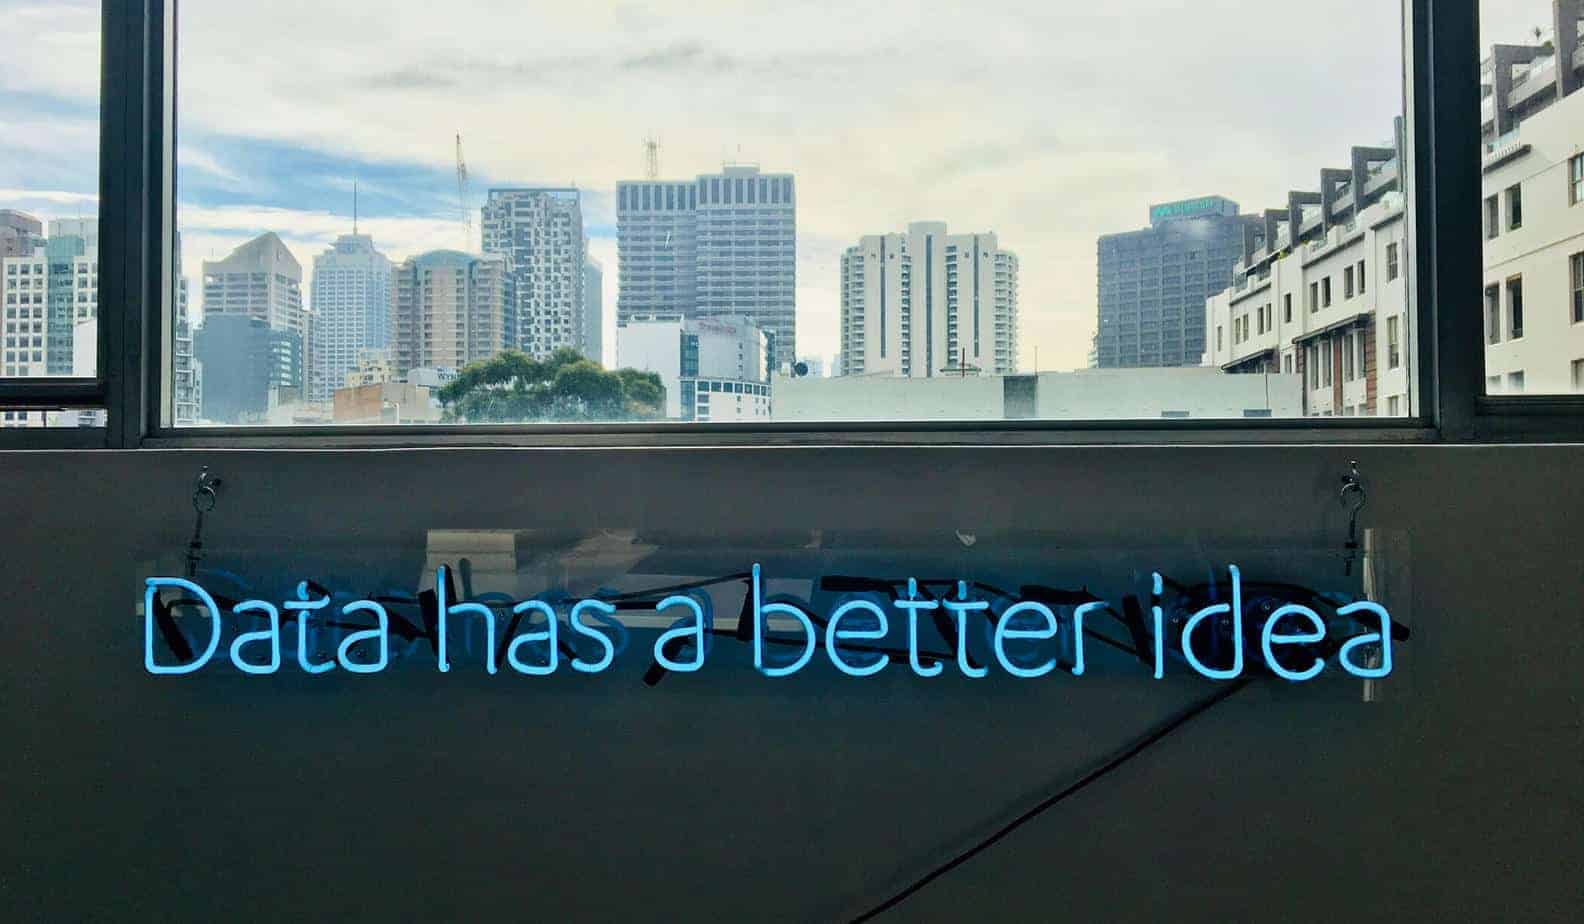 city view with the words "data has a better idea"